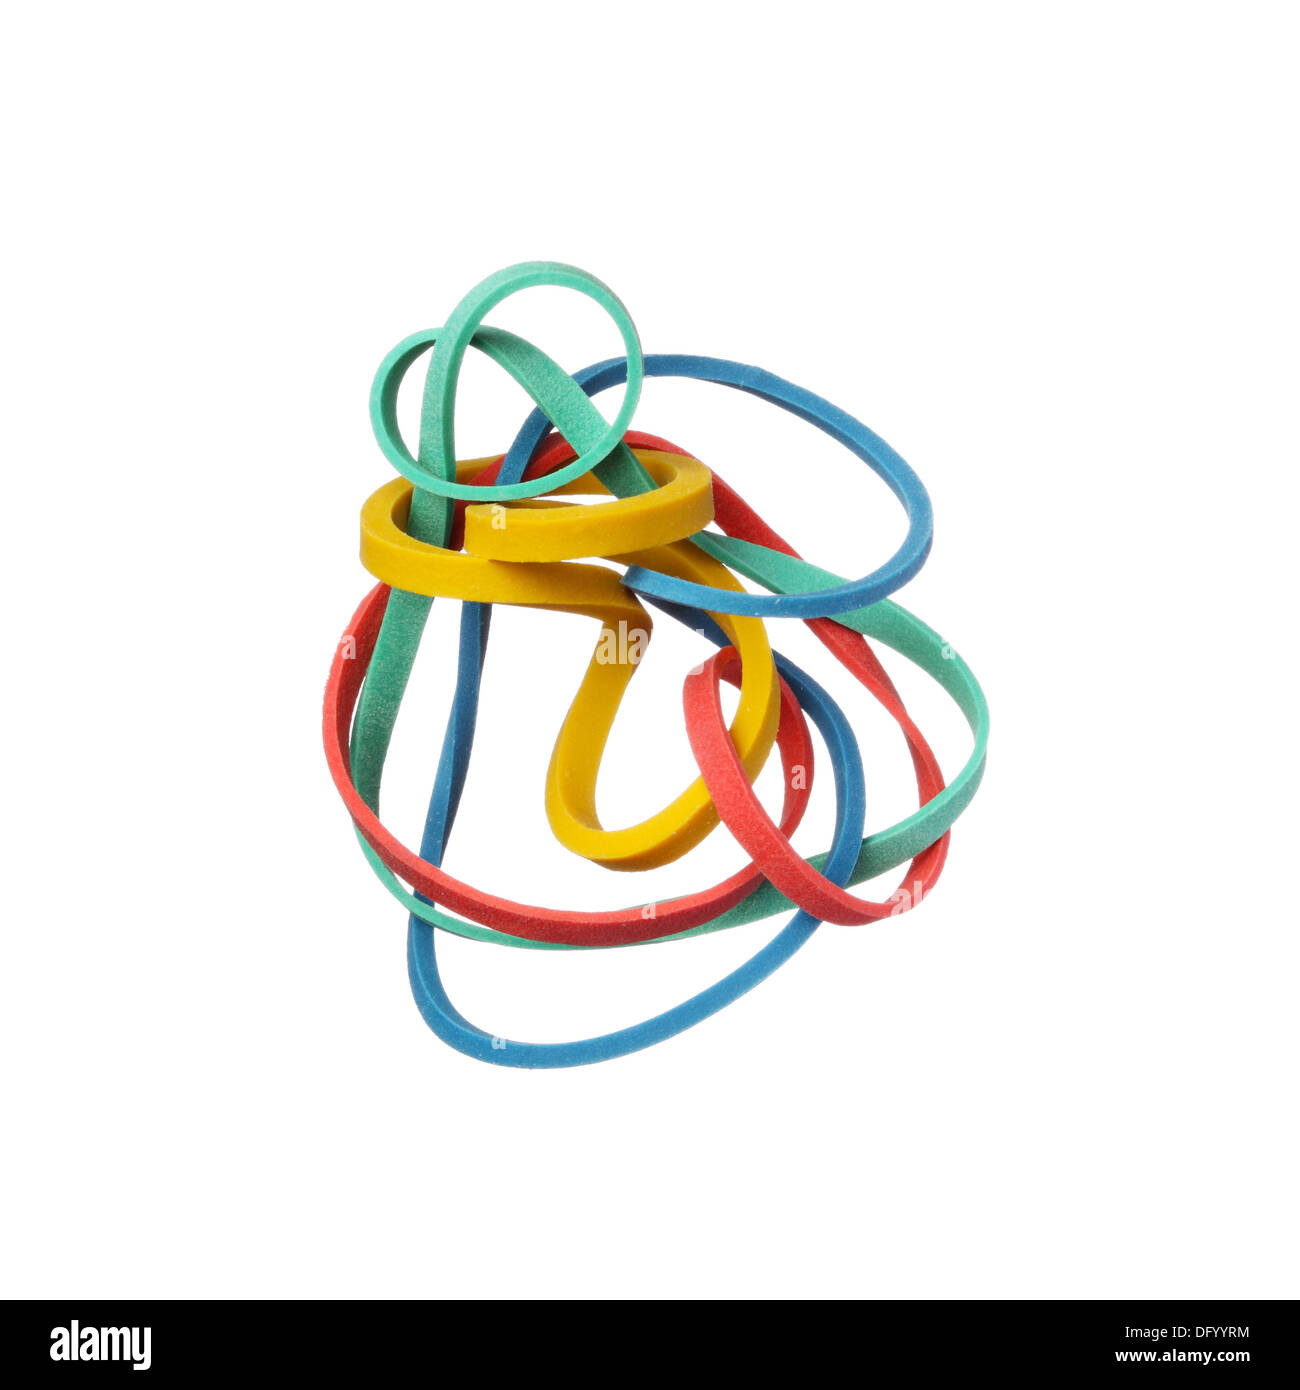 Tangled colorful elastic rubber bands isolated on a white background Stock Photo